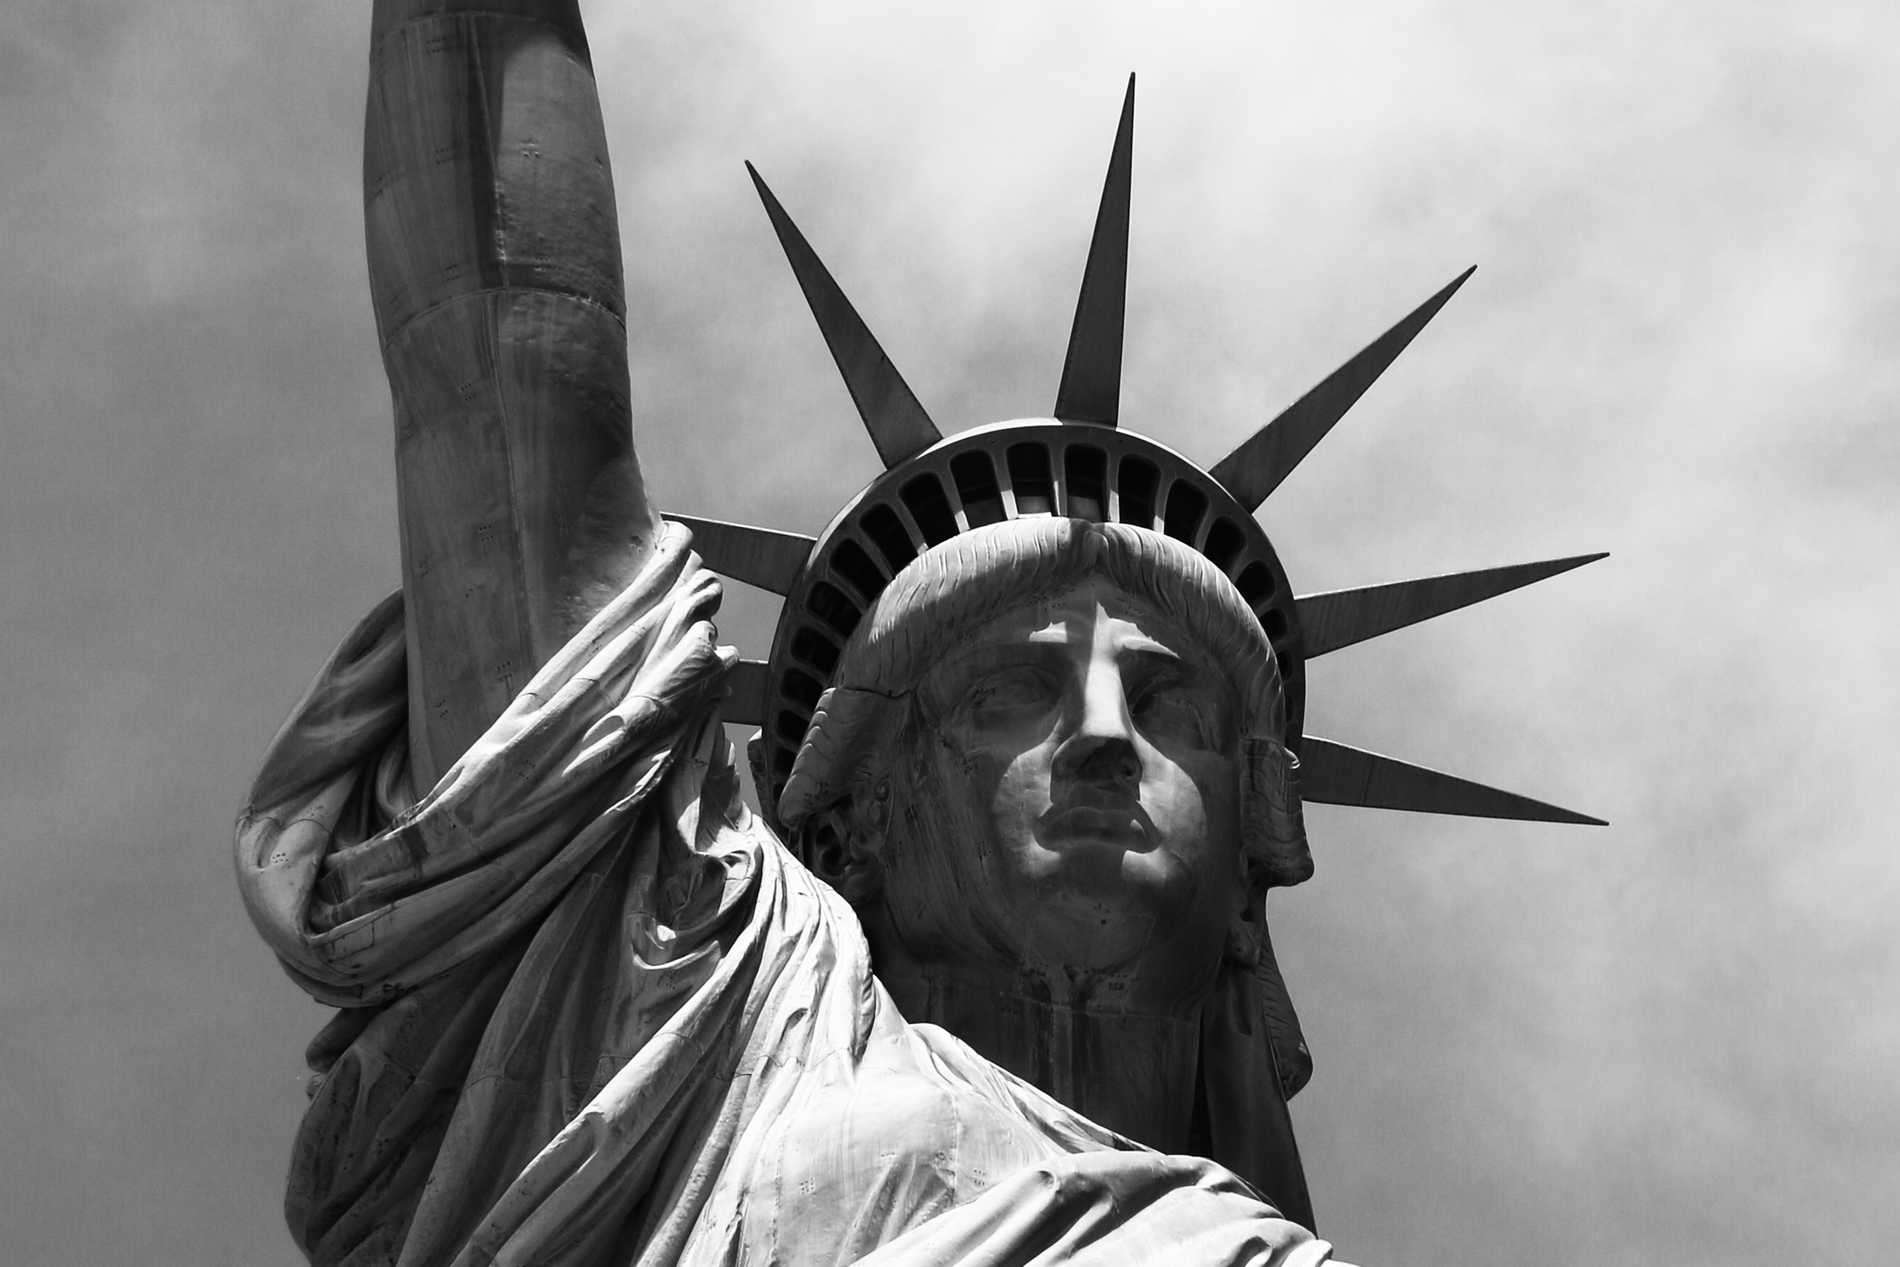 A grayscale close-up of the Statute of Liberty's face and crown.